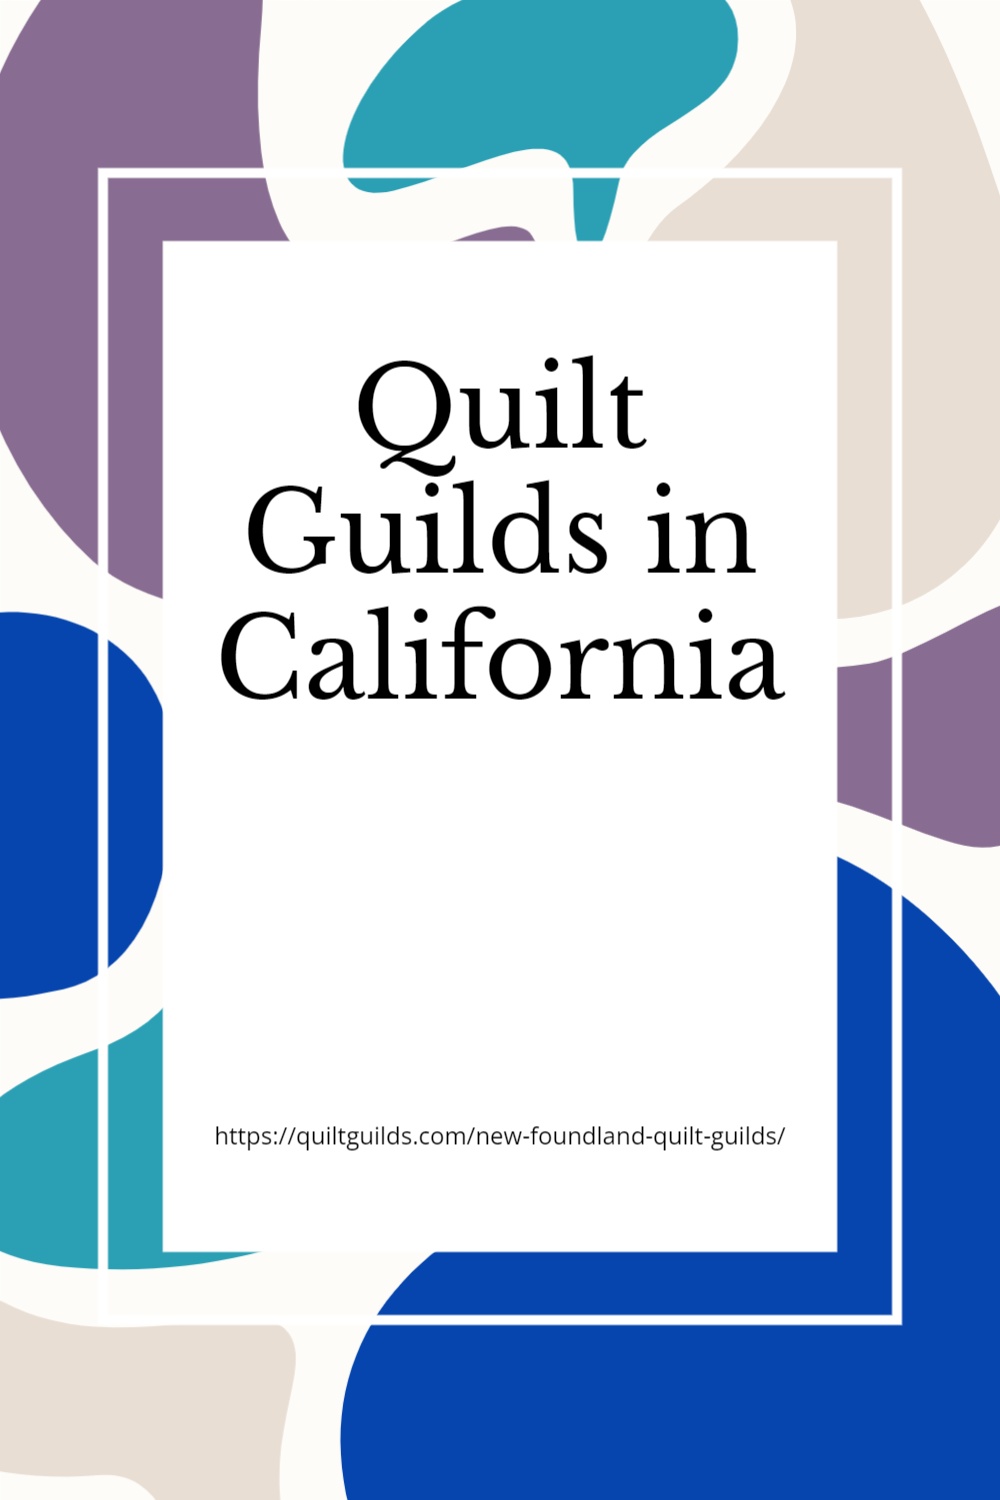 Quilting Guilds in California for quilters